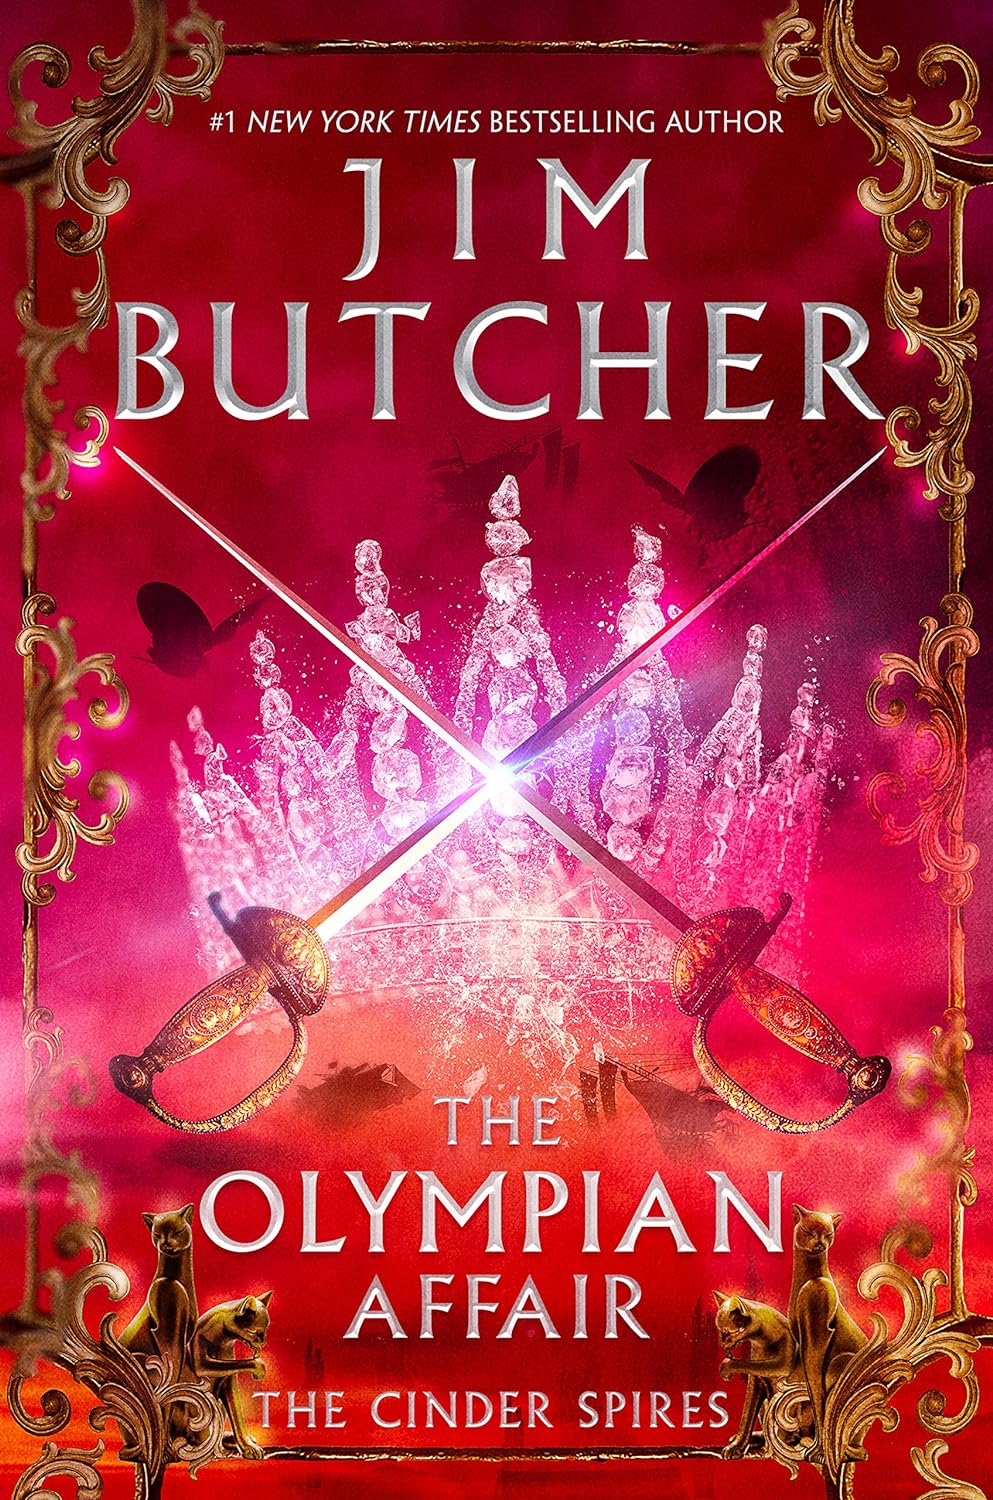 Image for "The Olympian Affair"